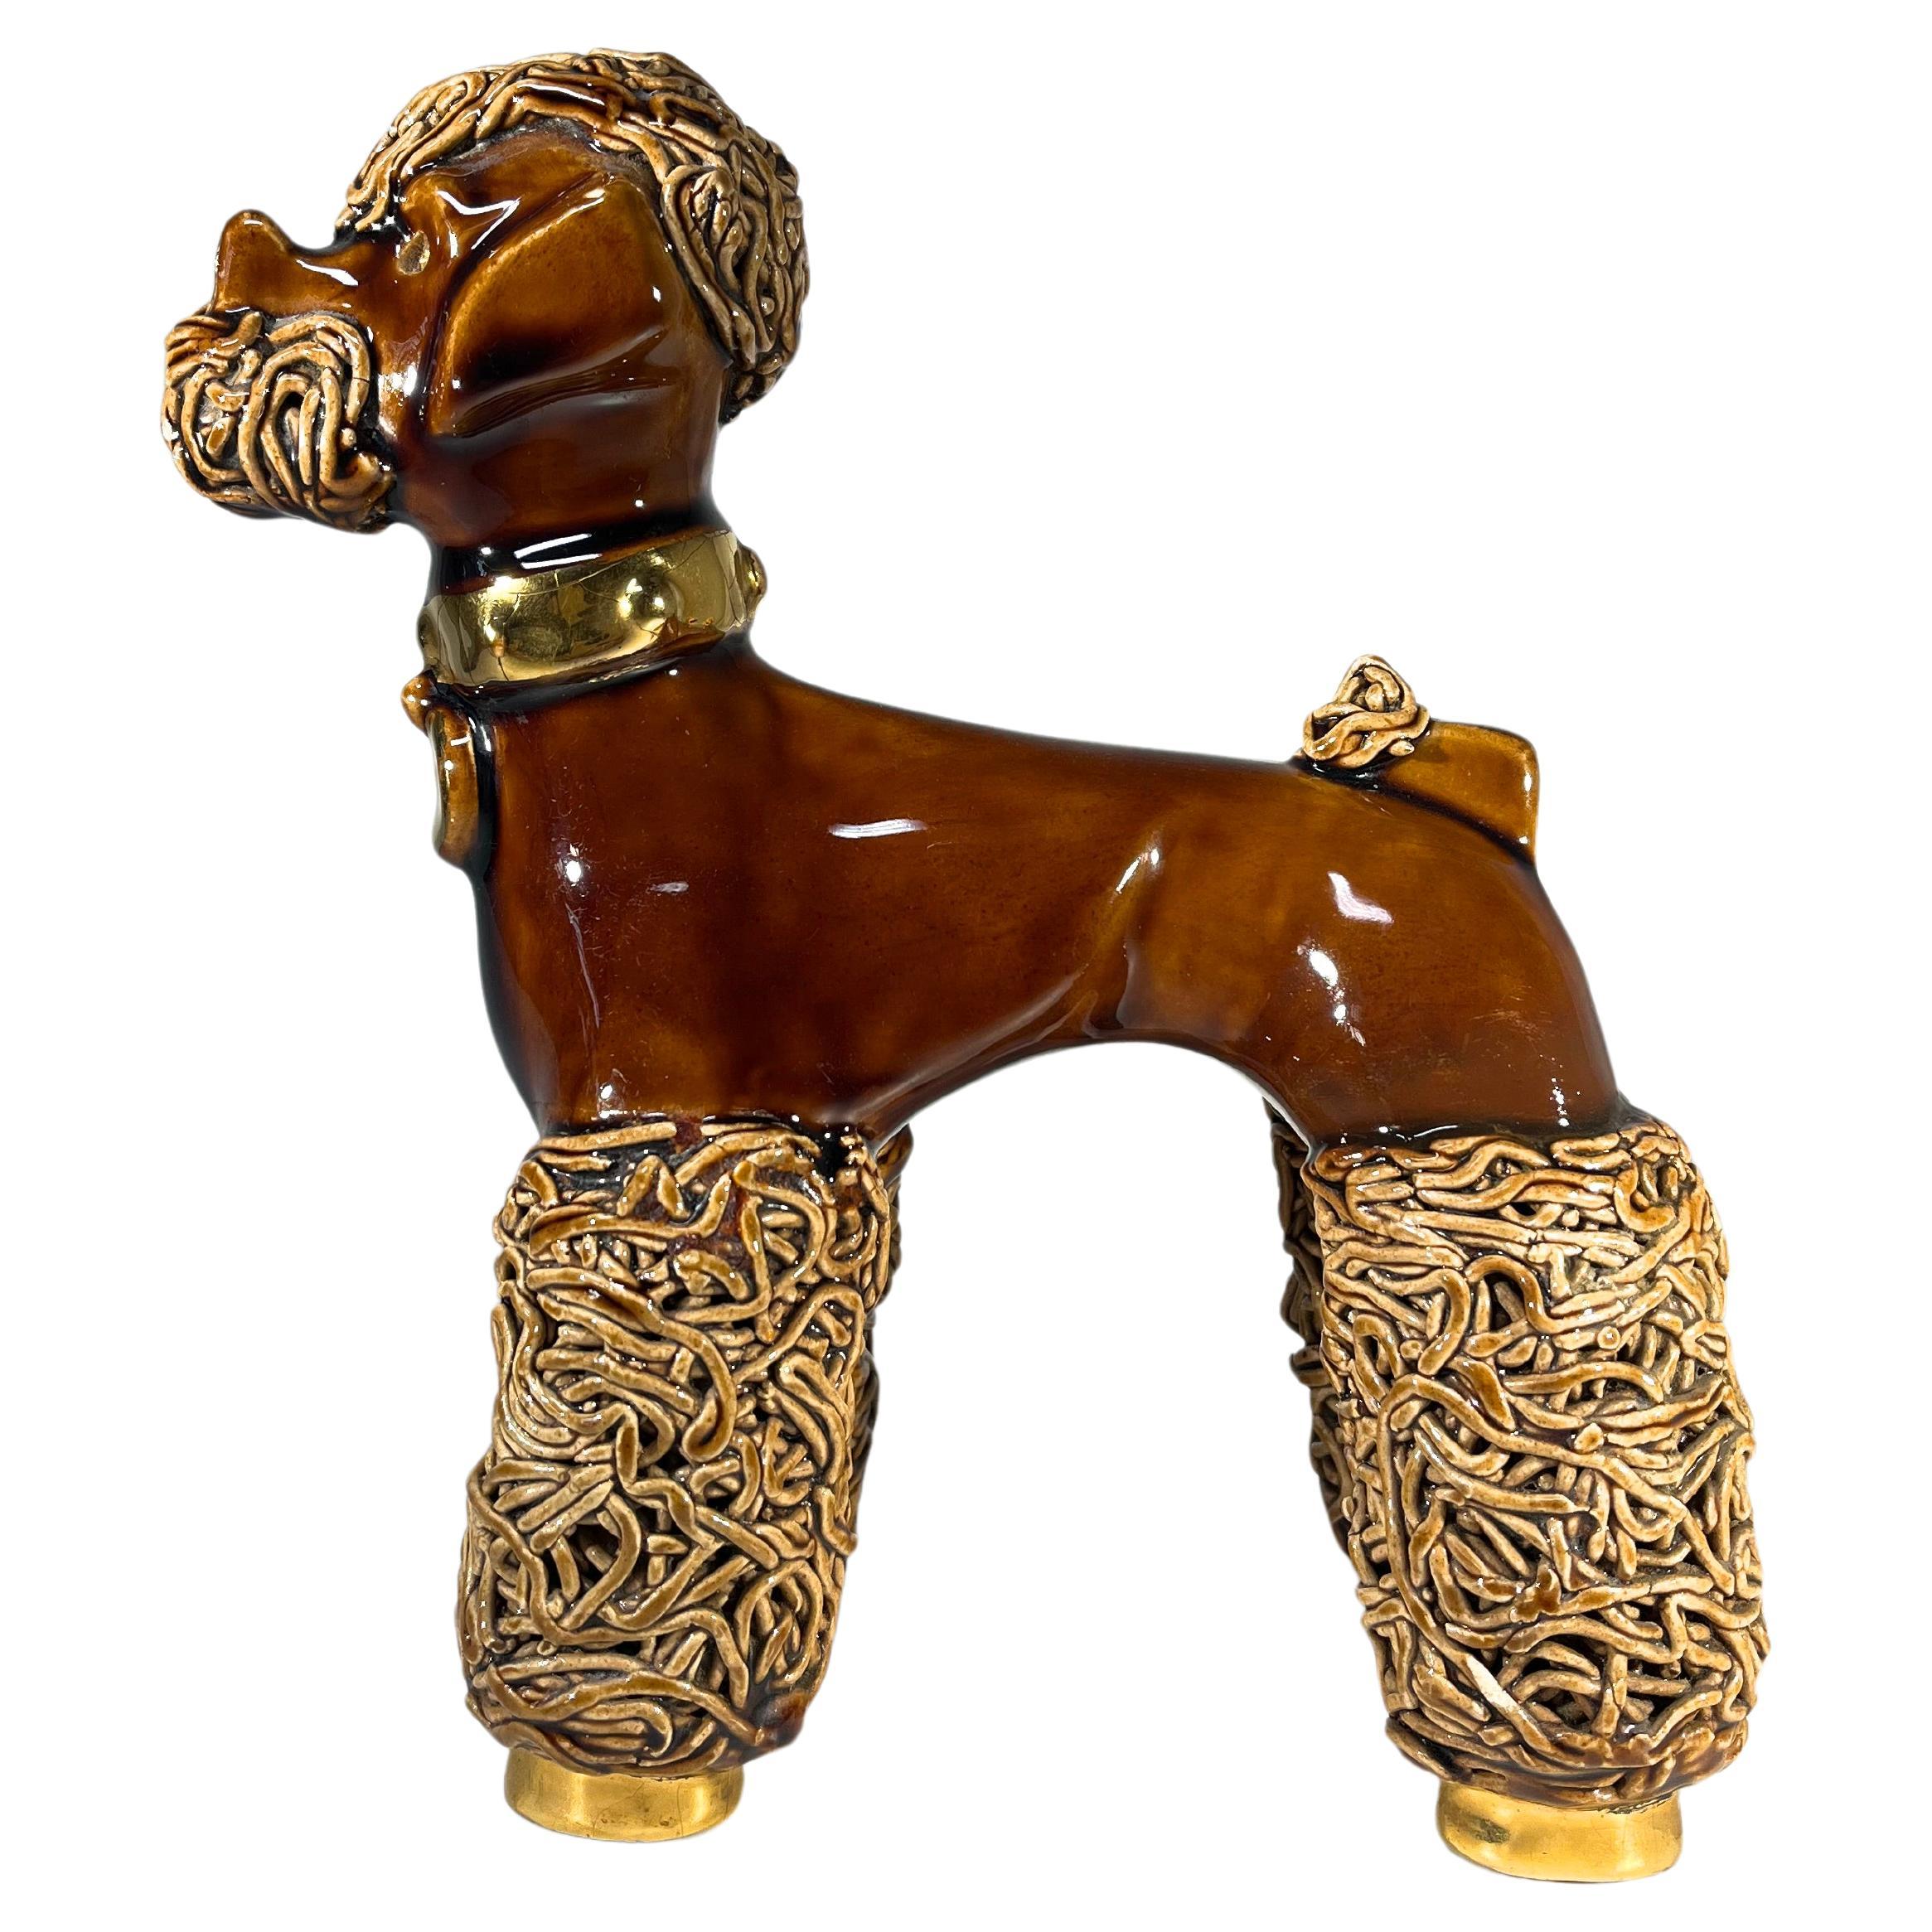 Adorable, Pedigree French Poodle, Toffee Glaze Ceramic Figurine, Vallauris 1950s For Sale